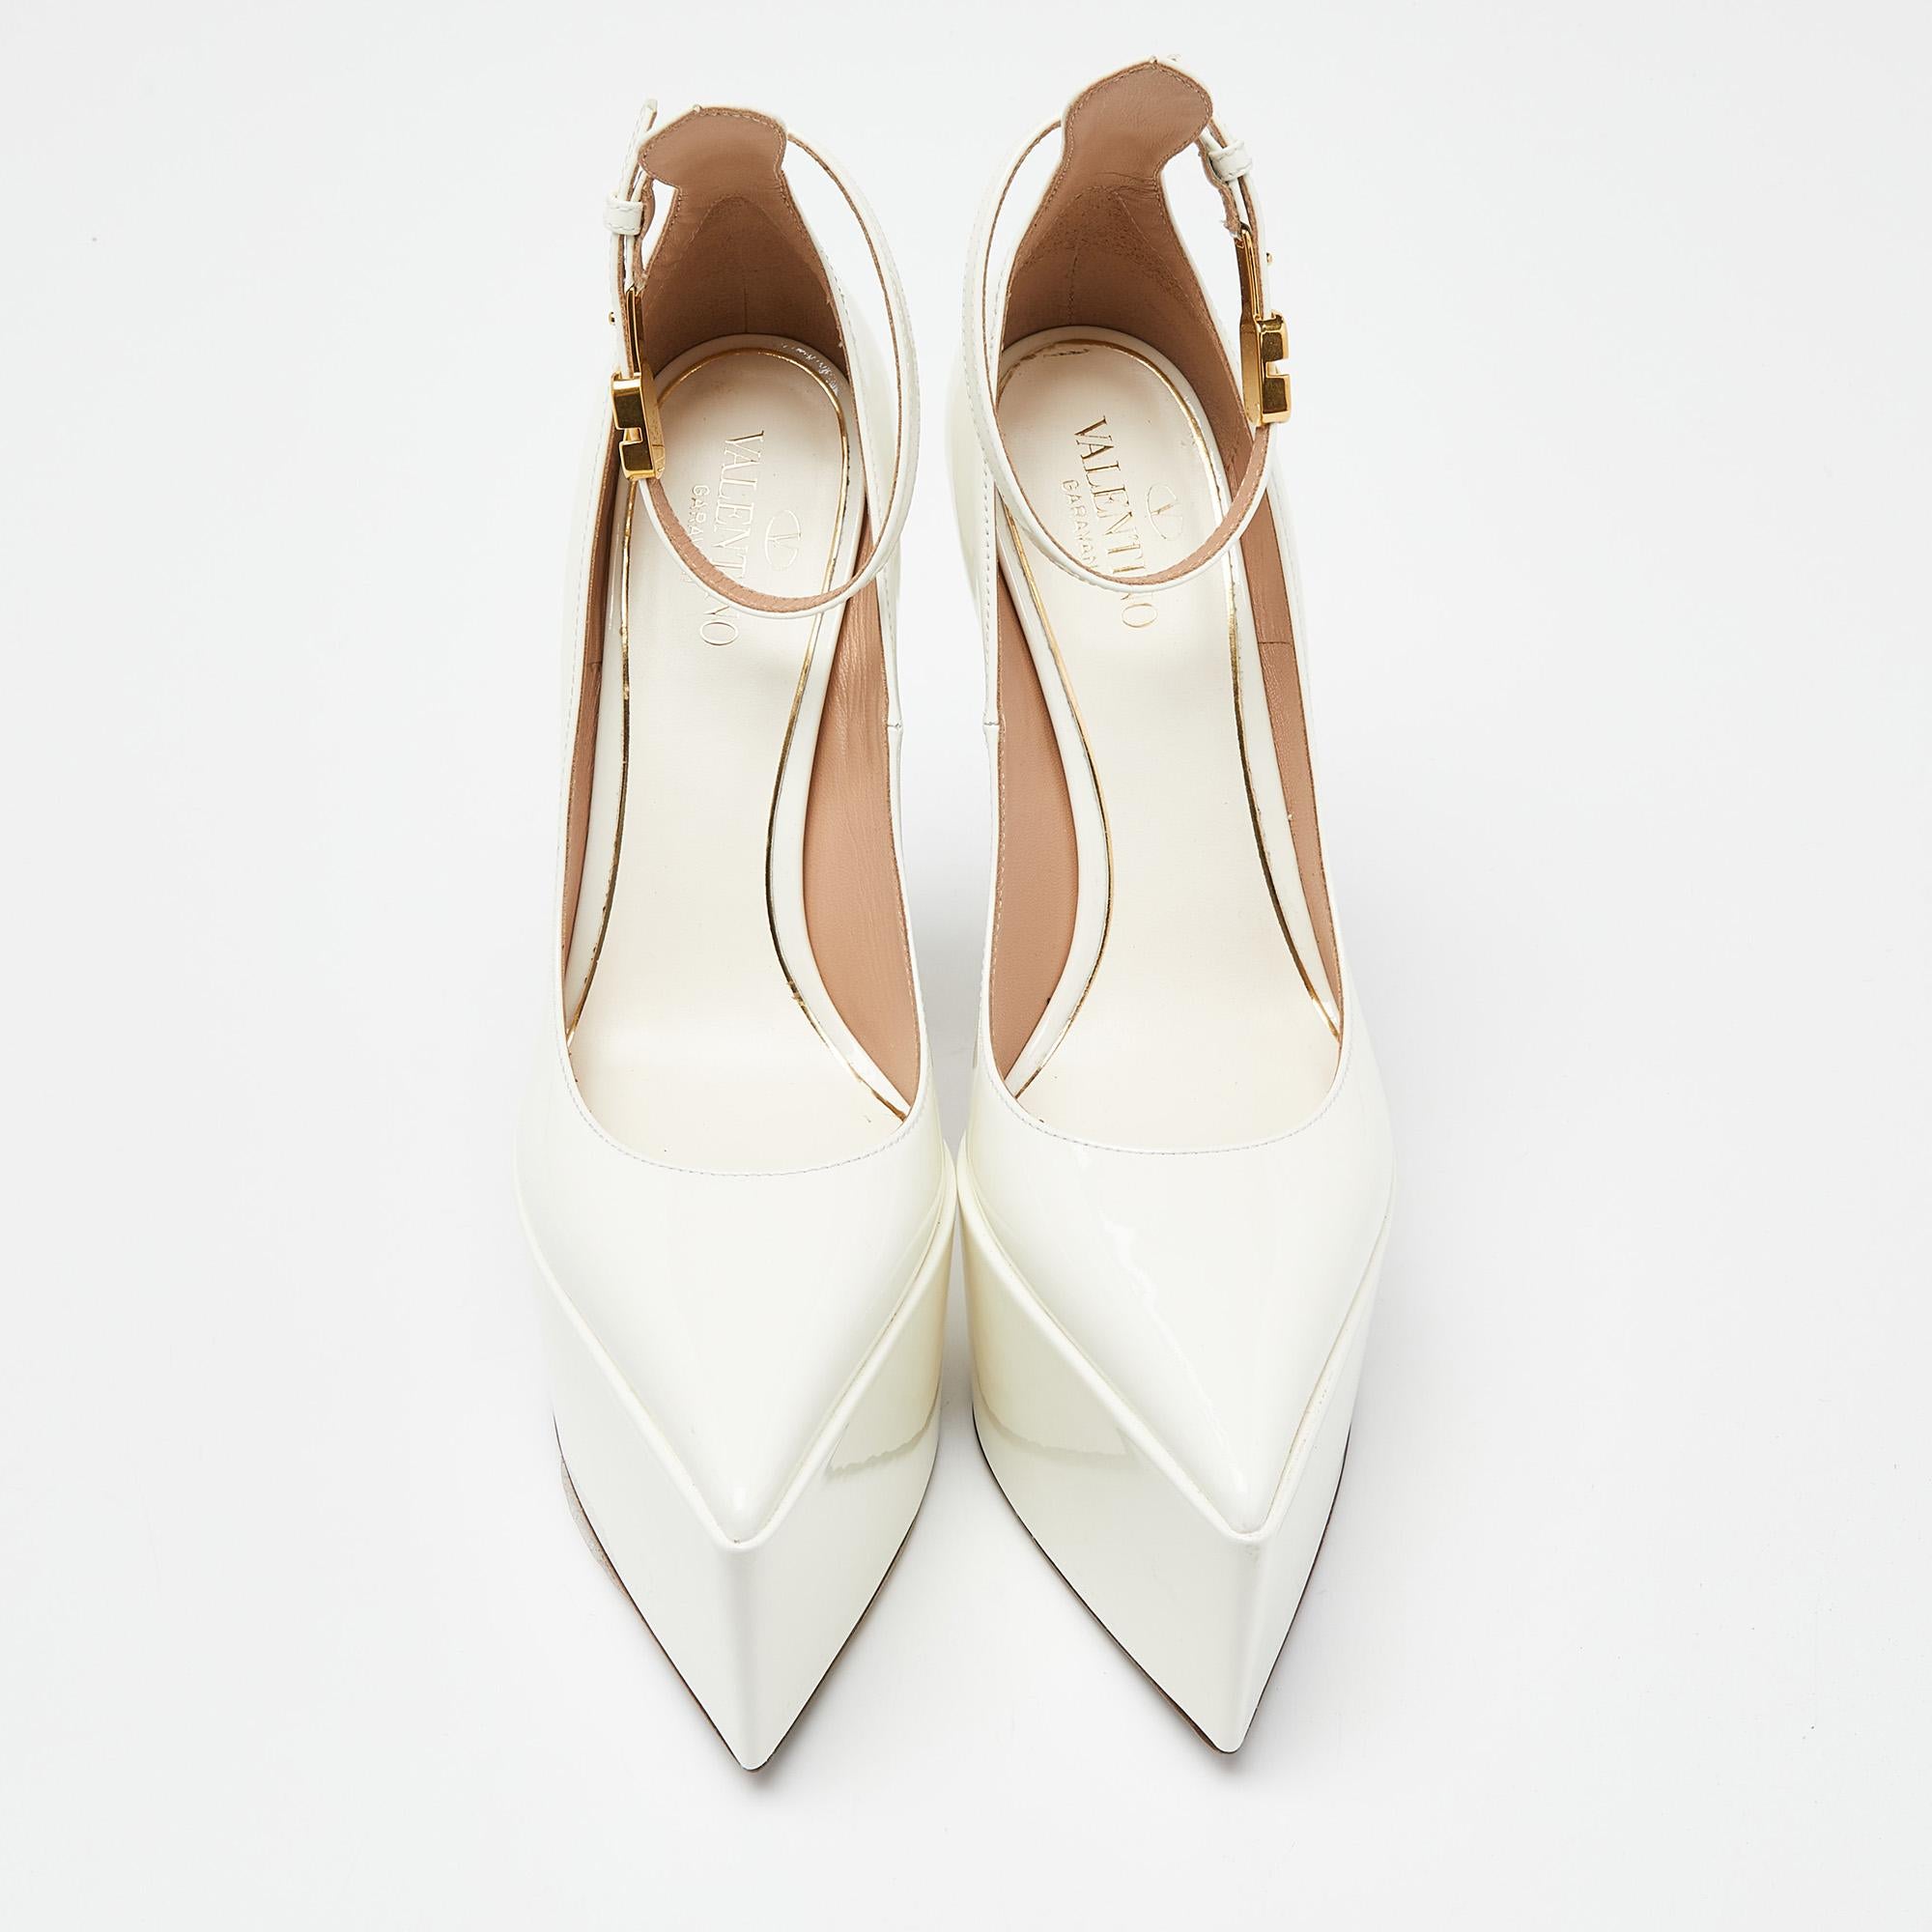 Discover footwear elegance with these Valentino women's pumps. Meticulously designed, these heels seamlessly marry fashion and comfort, ensuring you shine in every setting.

Includes
Original Dustbag, Original Box, Info Booklet